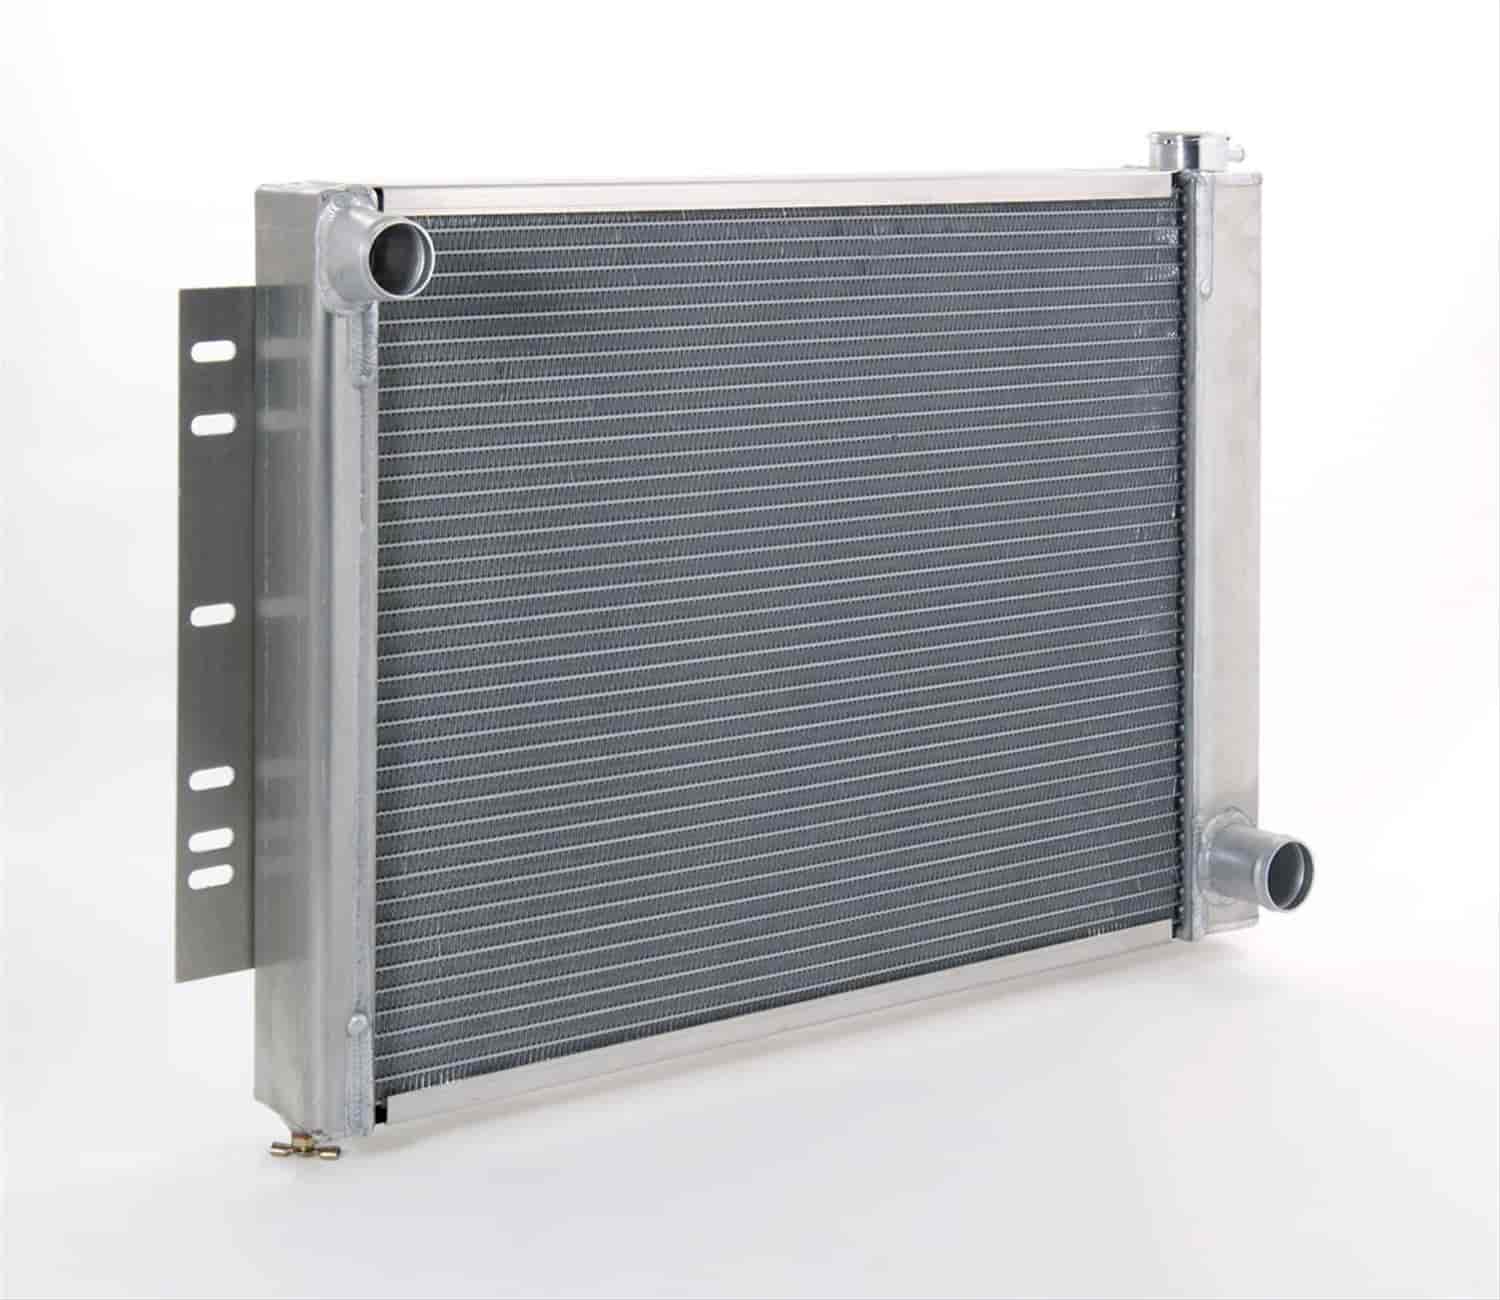 Direct-Fit Polished Finish Downflow Radiator for Mopar Truck